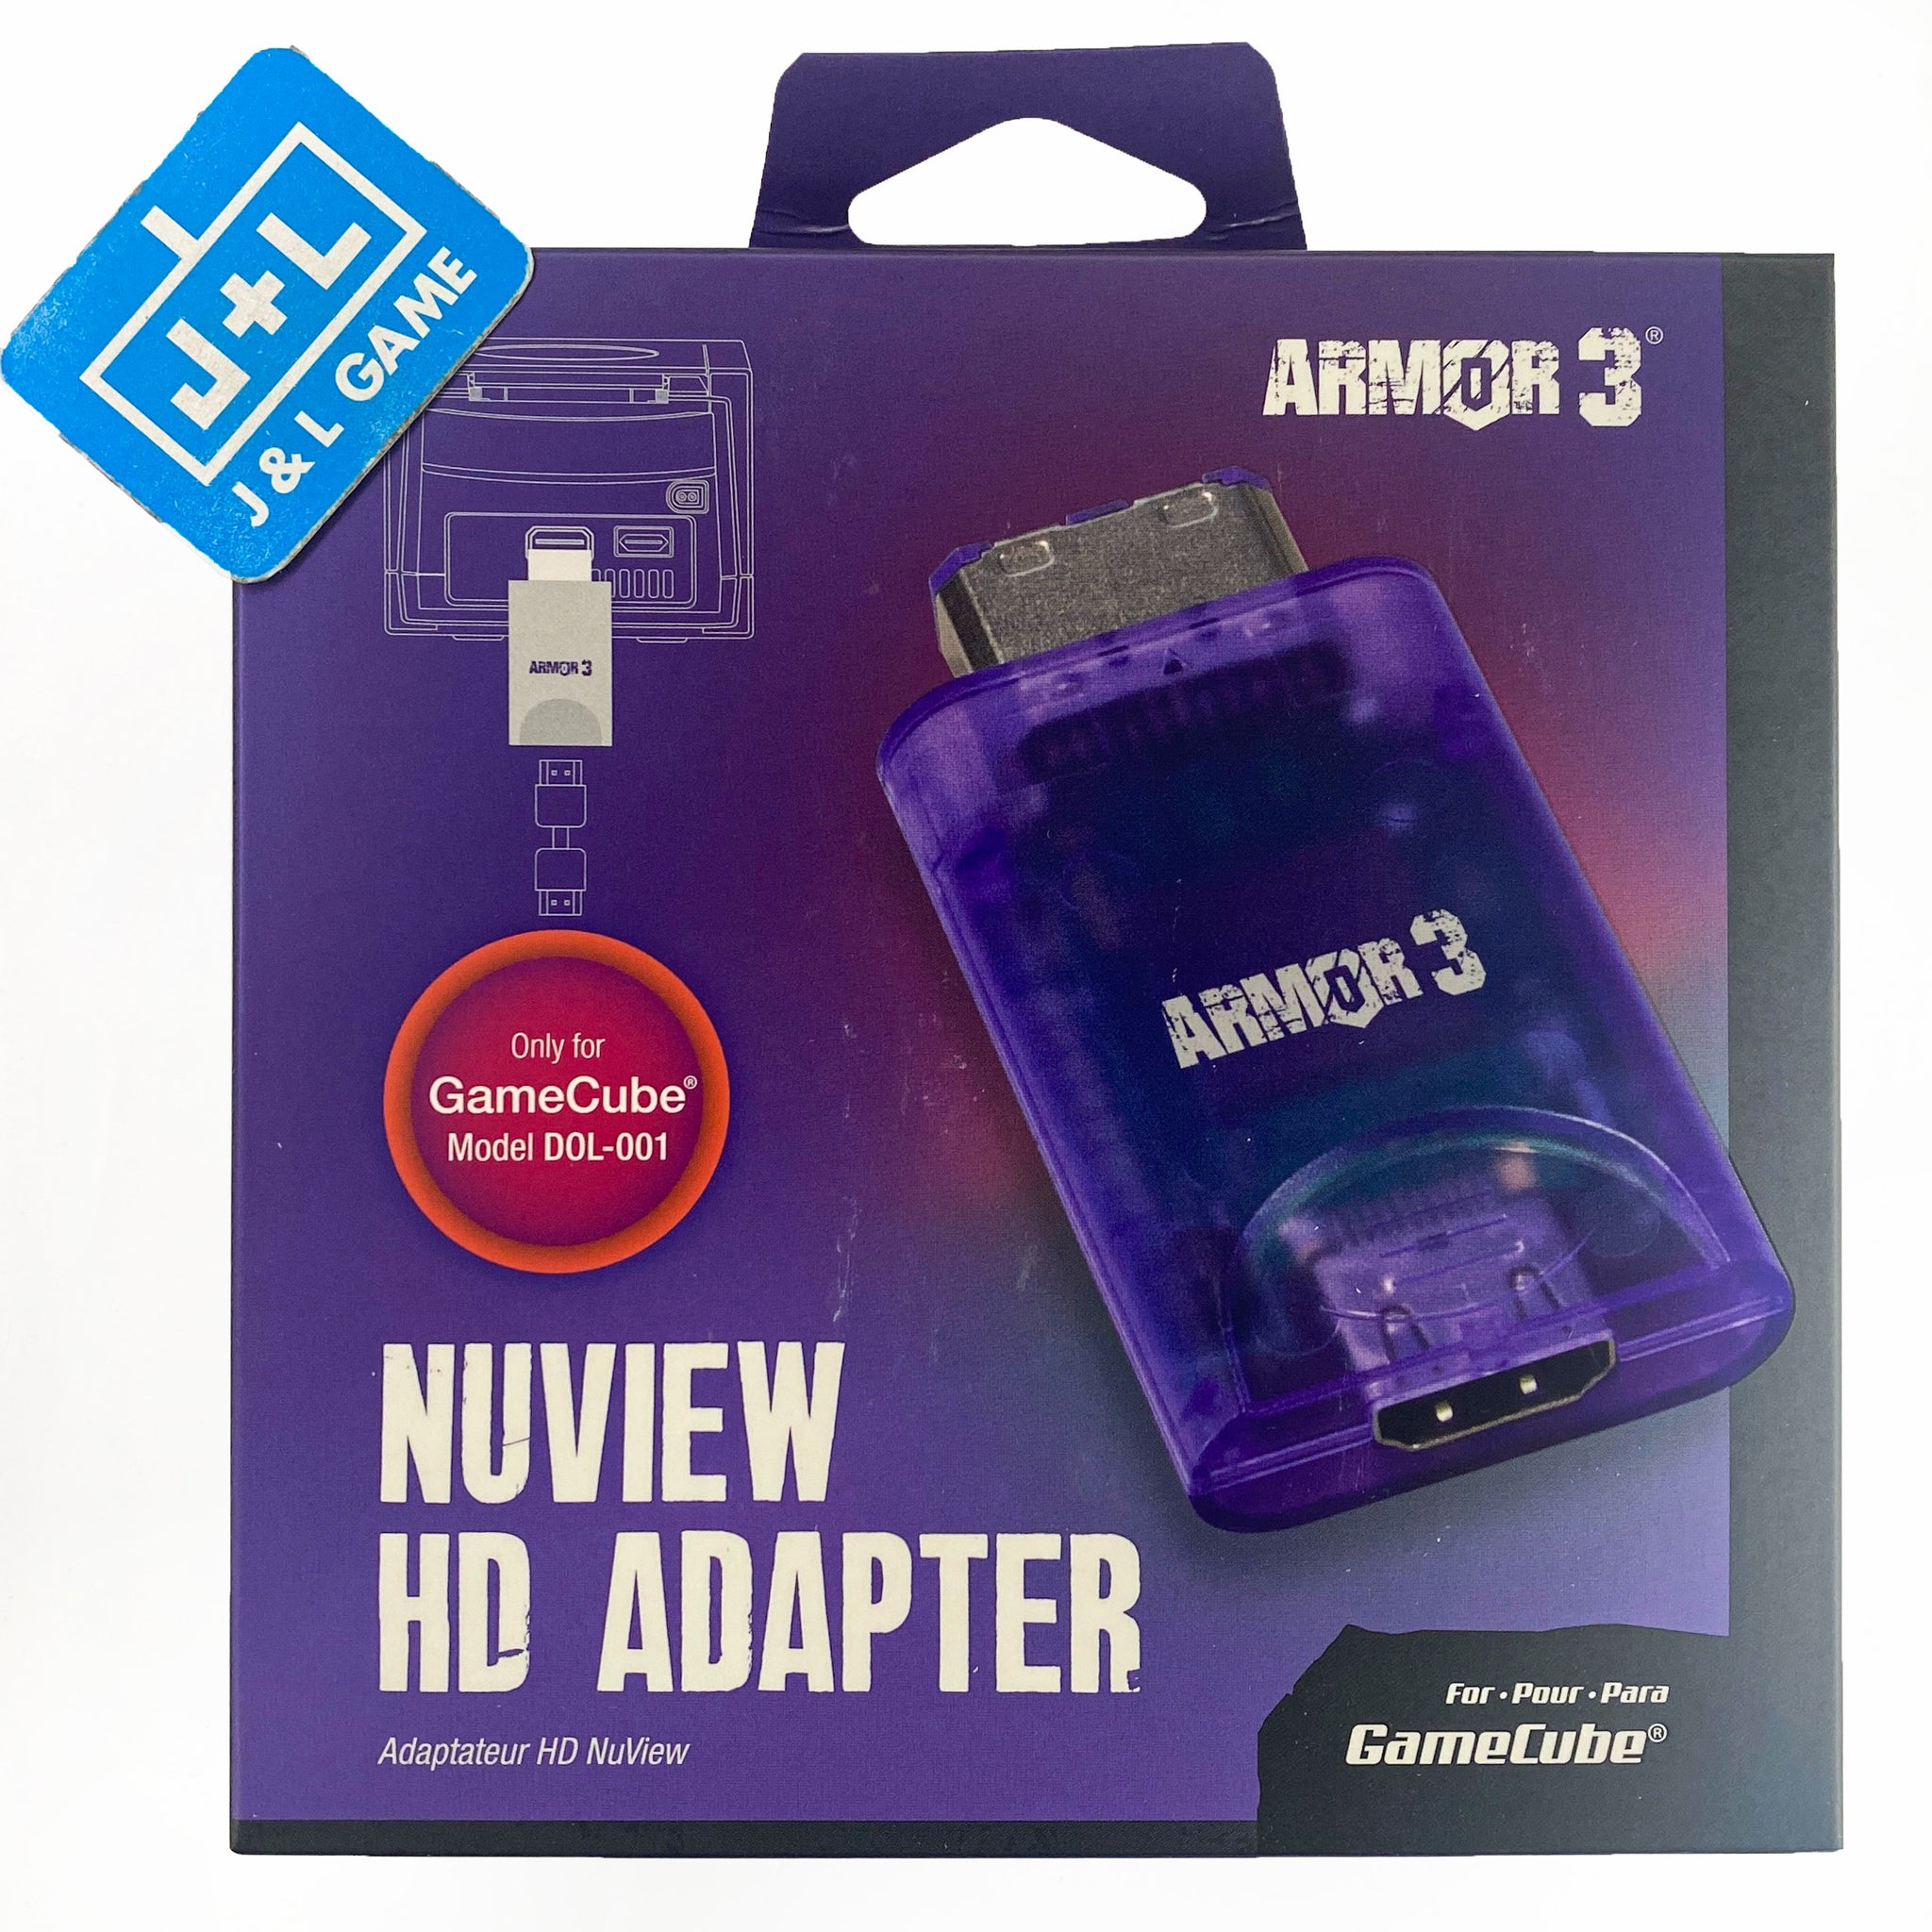 Armor3 "NuView" HD Adapter HDTV Upscaling for GameCube - (GC) GameCube Accessories Armor3   